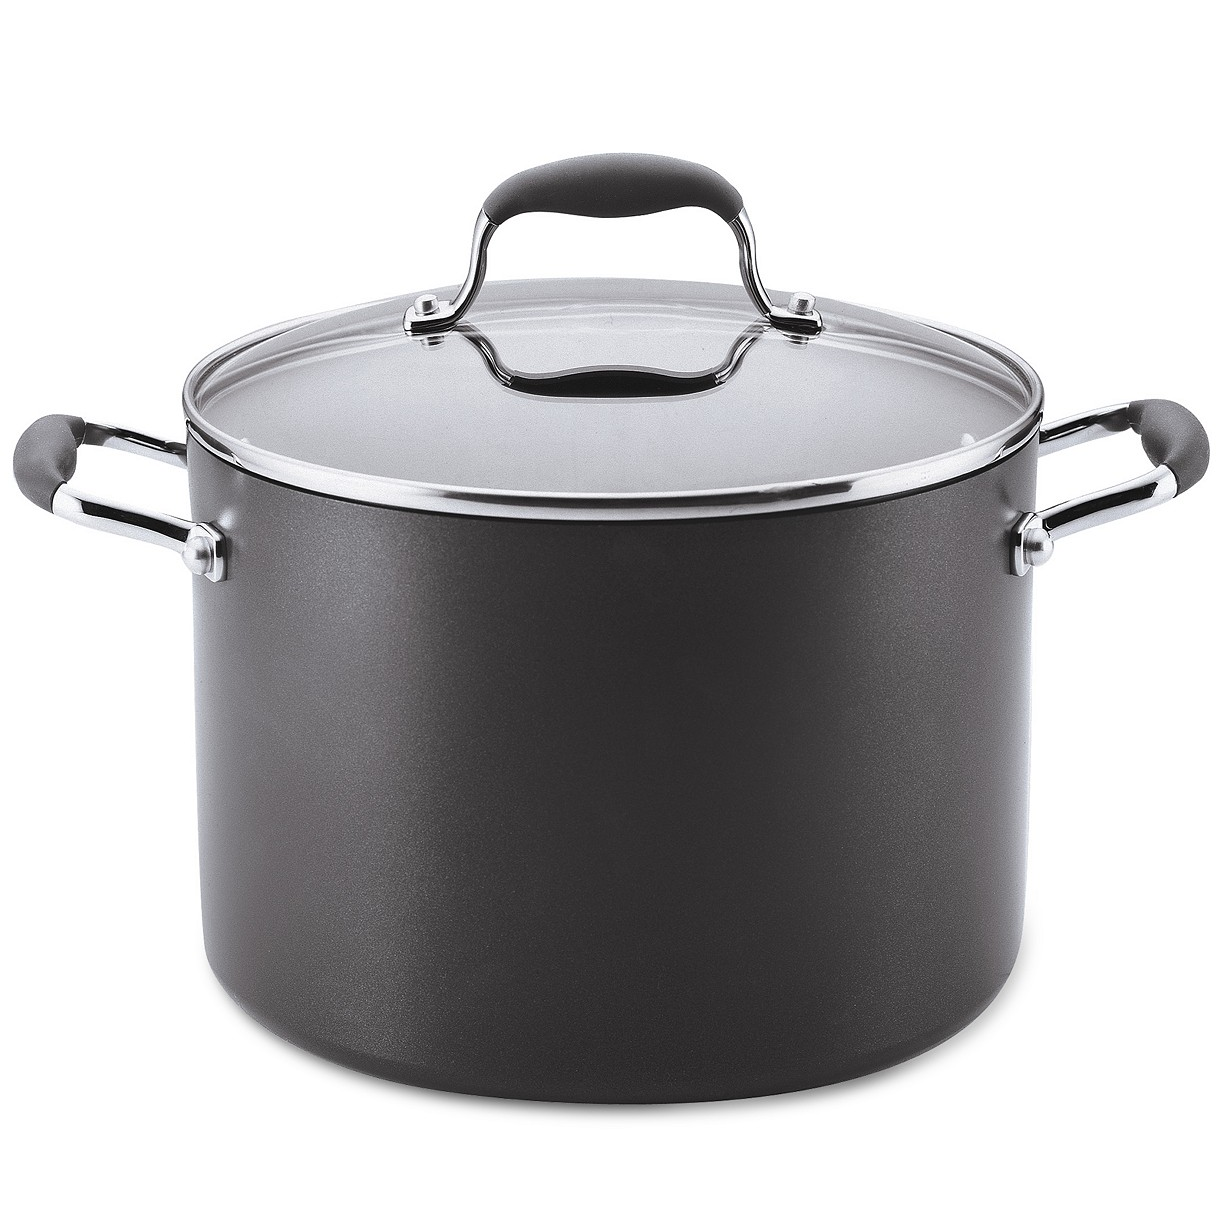 Macy’s: Anolon Advanced 10 Quart Stockpot with Lid Only $29.99!